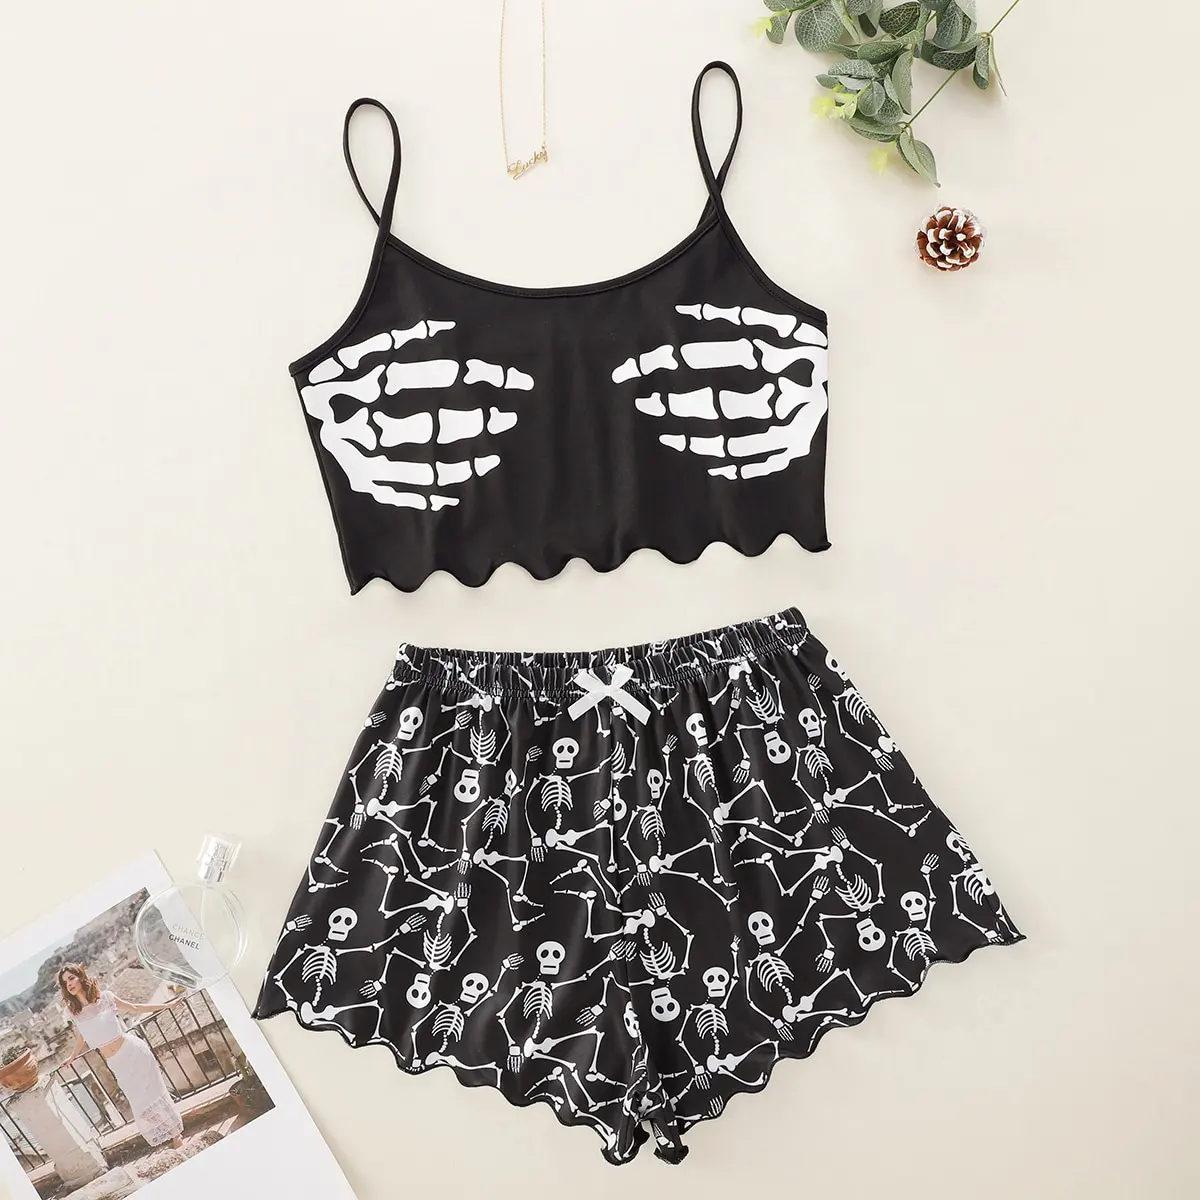 

Skull Hand Print Halter Tops and Bows Embellished With Wave-Cut Shorts Pajama Housecoat Set